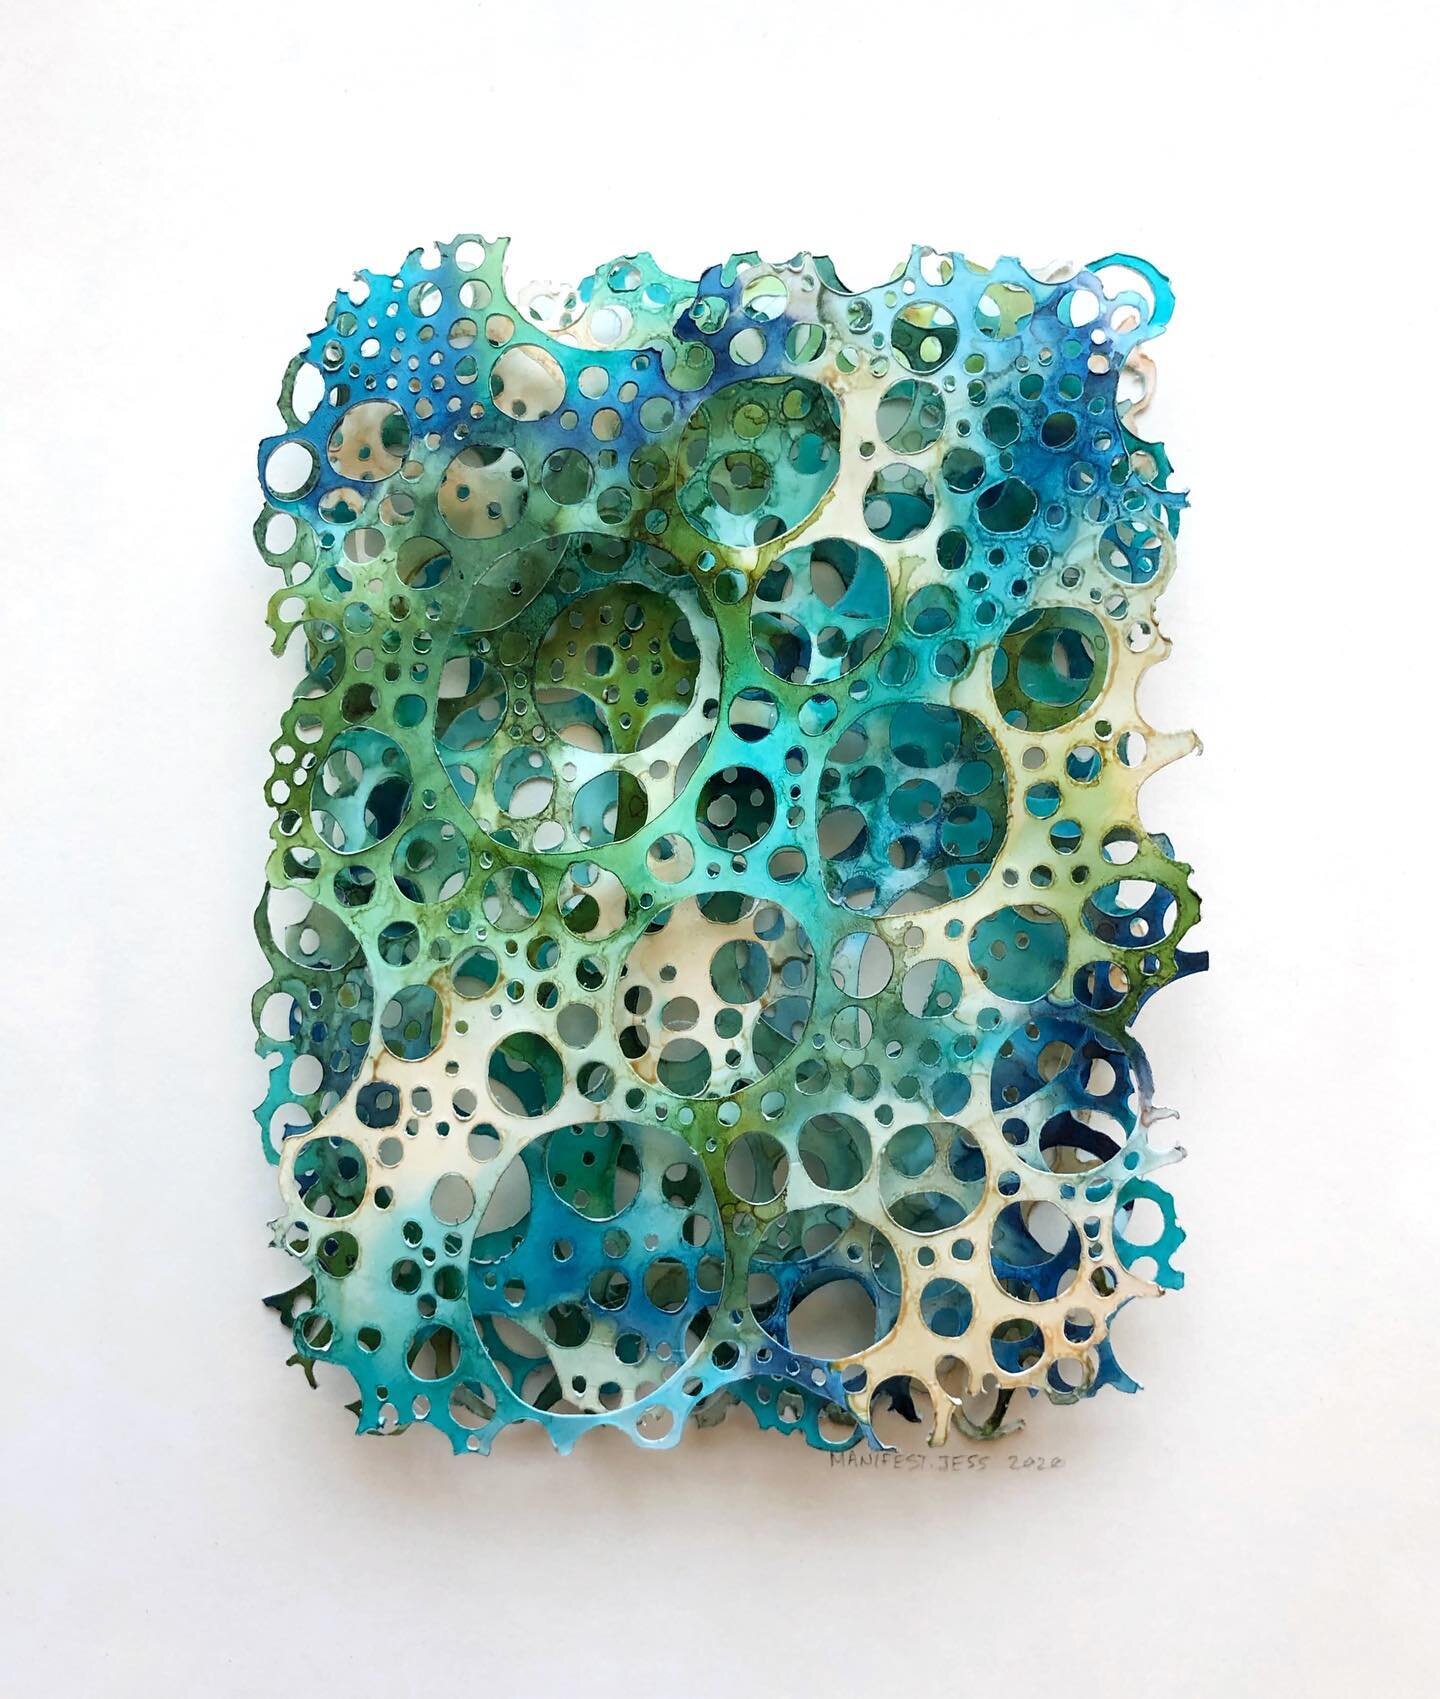 This 3D Cell Series piece from last summer was inspired by the sea foams in the ocean. Such a nice change of pace from all the bright colored cell pieces I work on, although I love those too. It&rsquo;s always nice to try something different. I&rsquo